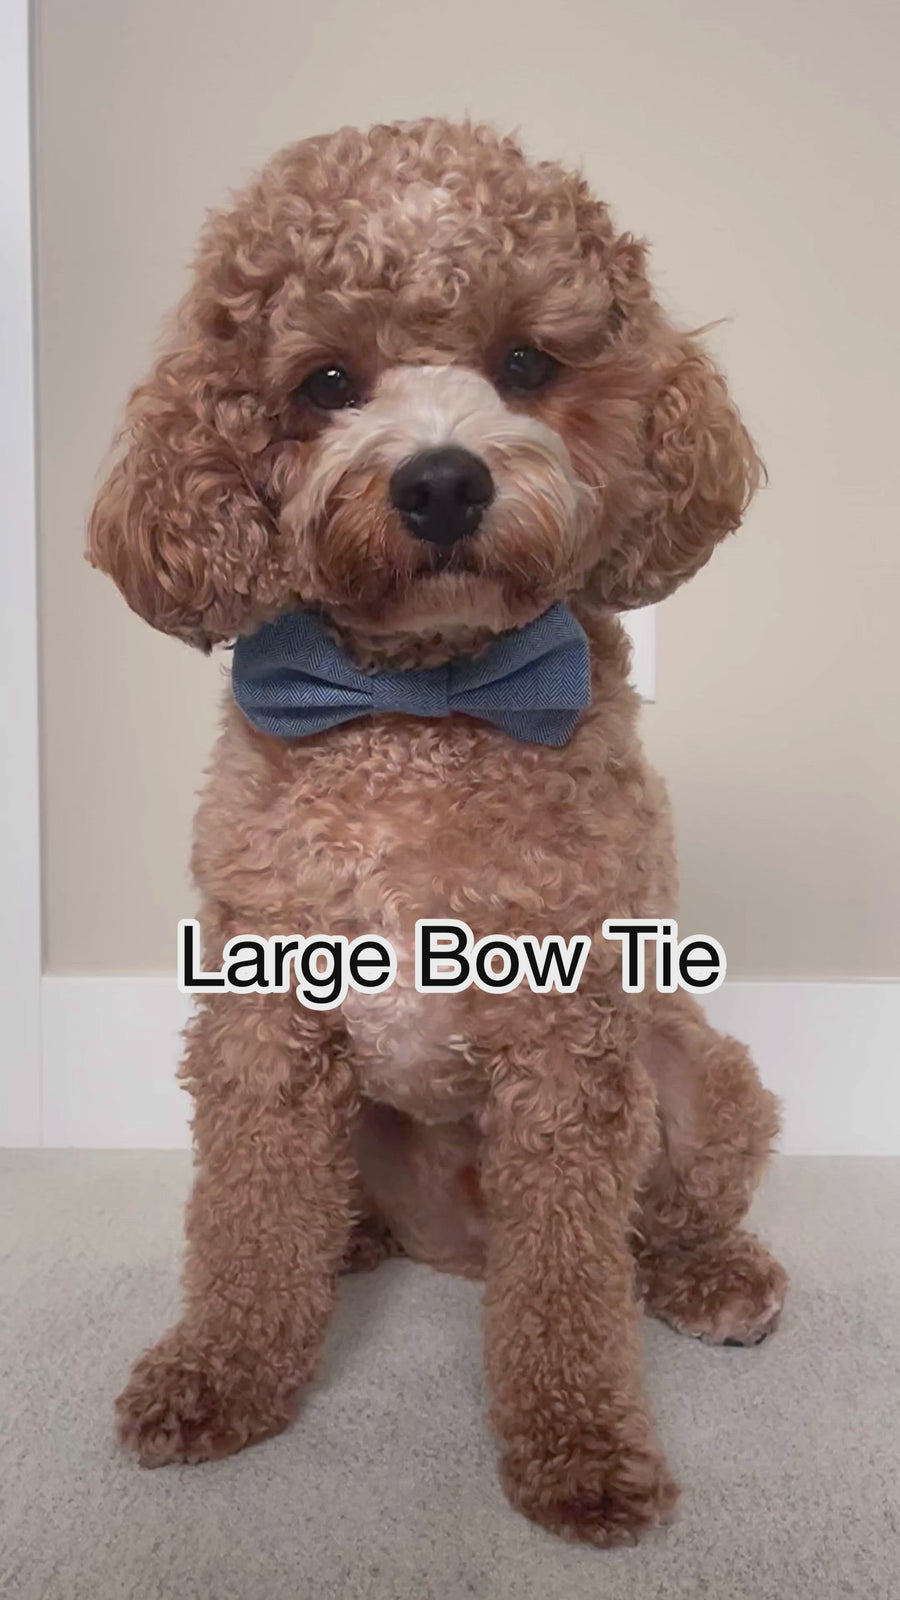 Ivory Flannel Dog Bow Tie